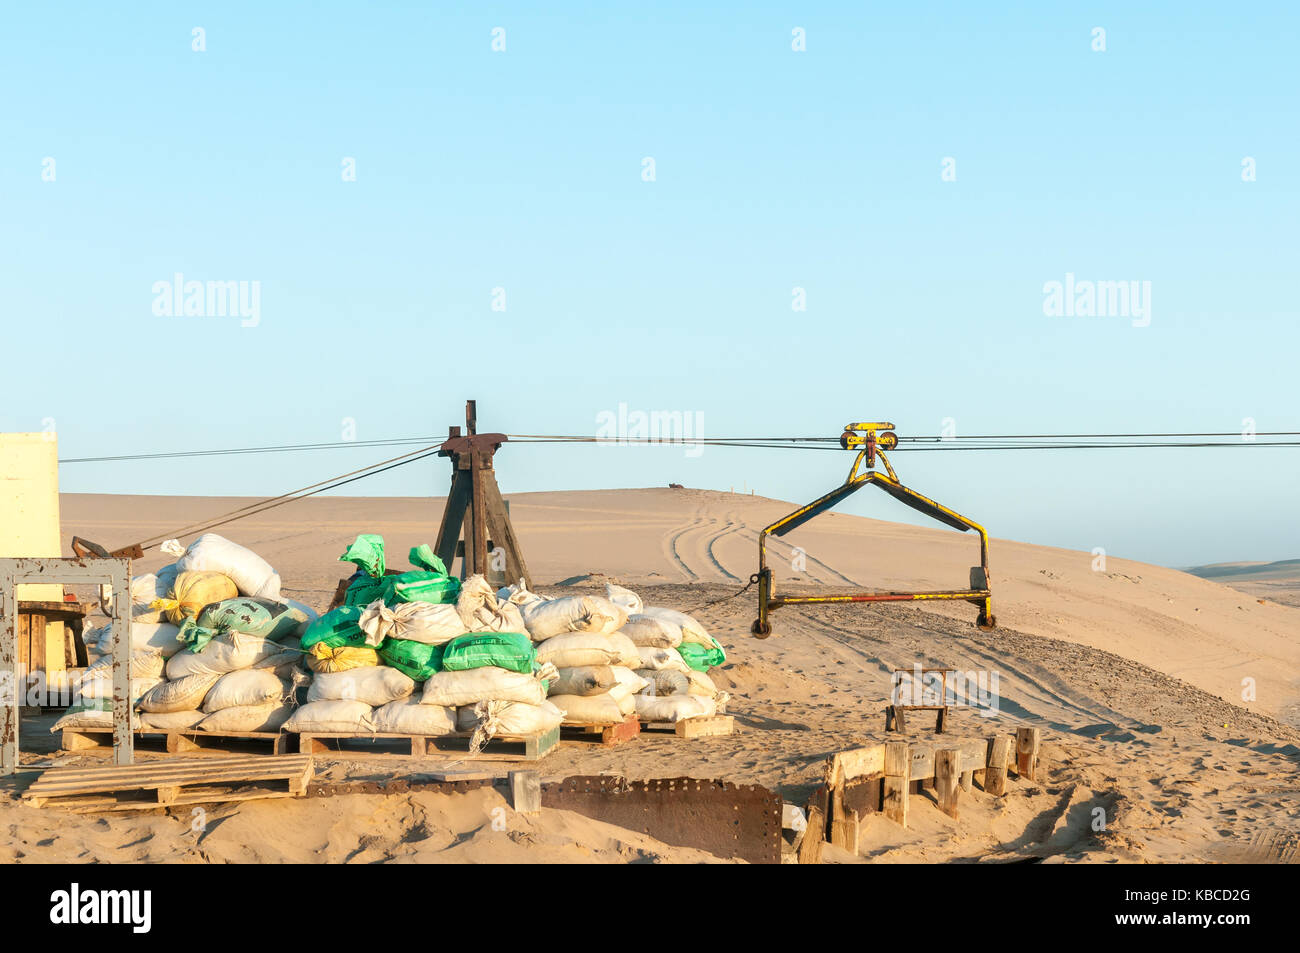 A cableway pylon and trolley at the guano island near Longbeach in the Namib Desert on the Atlantic Coast of Namibia Stock Photo